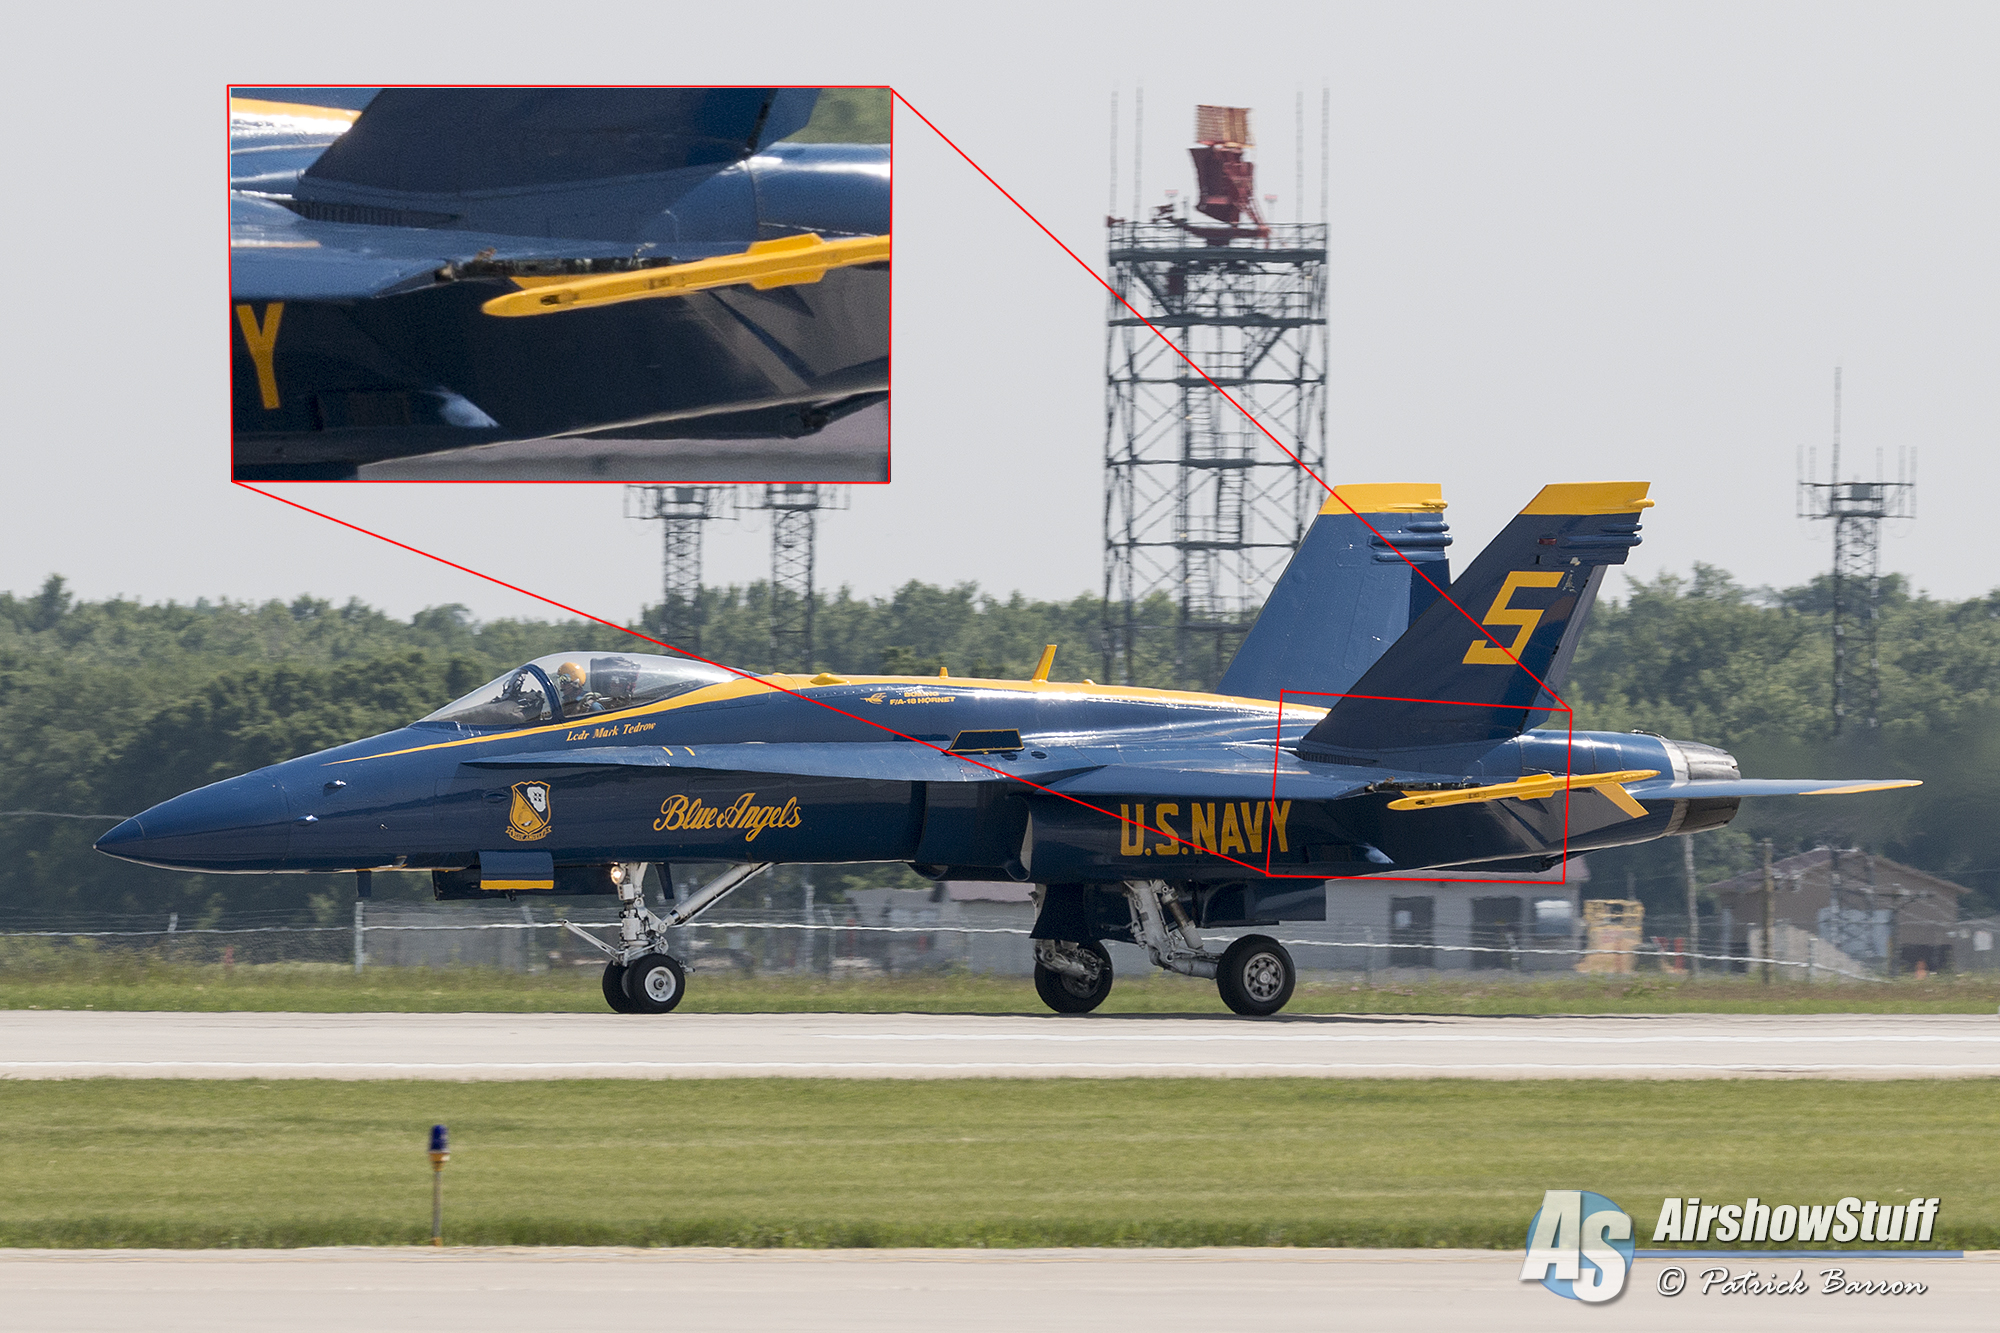 Blue Angel #5 Loses Part Of Wing At Rockford Airfest – AirshowStuff